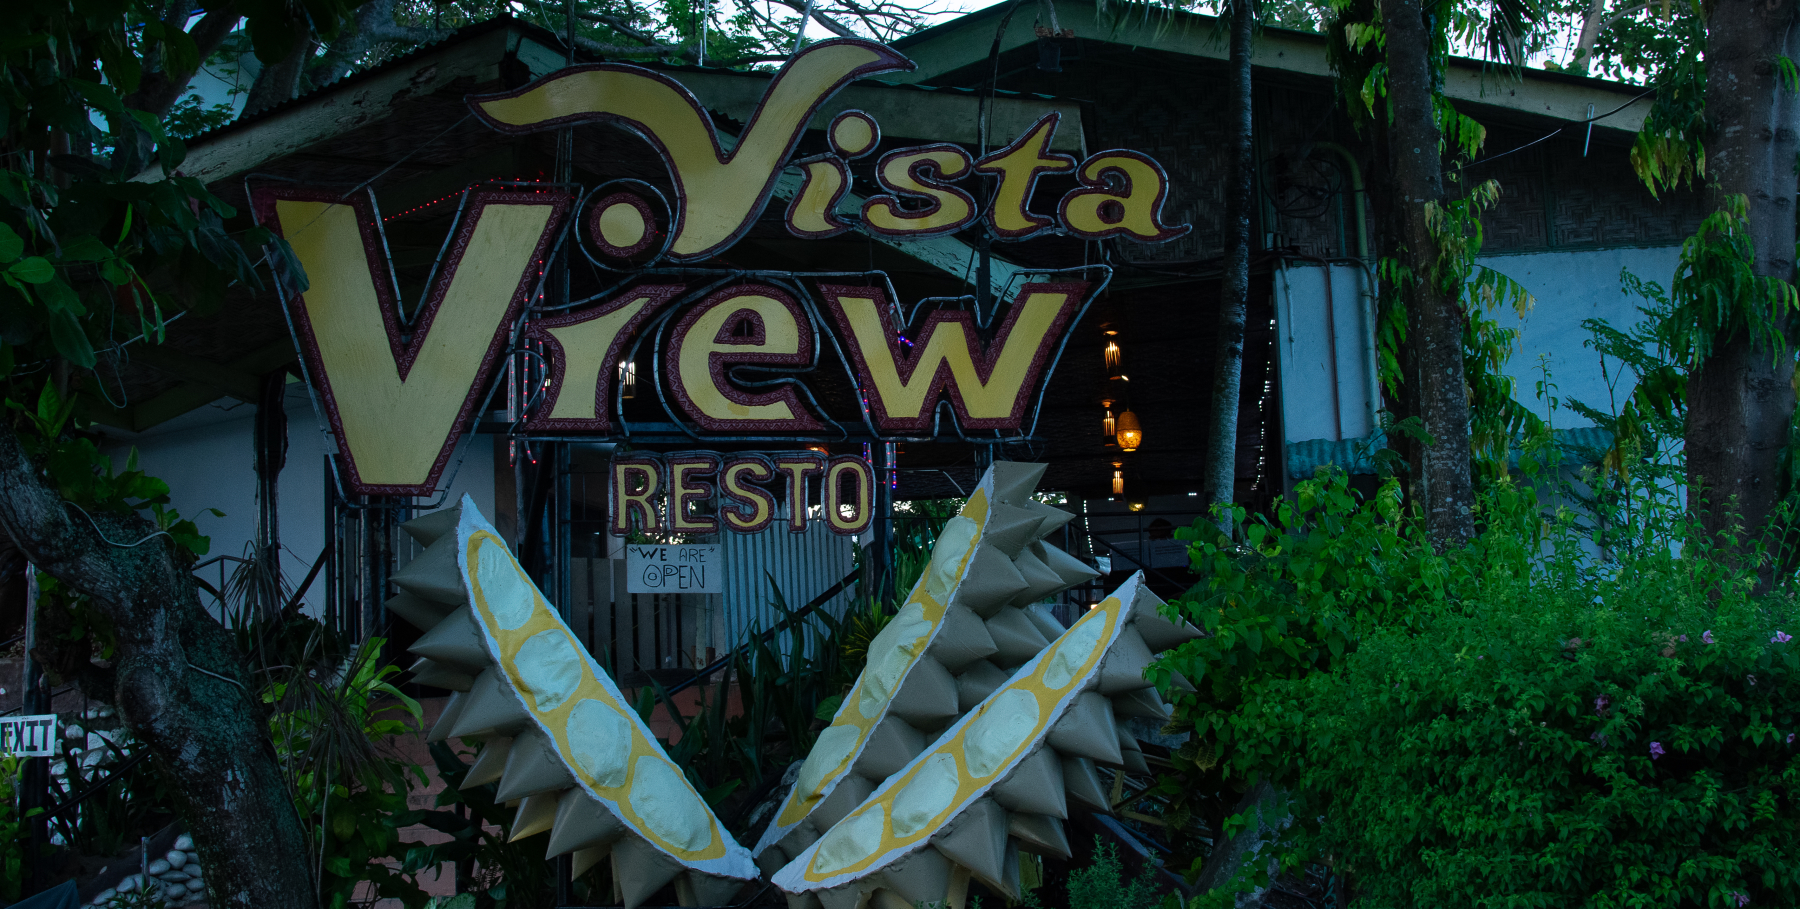 Vista View - a great dining destination in Davao City